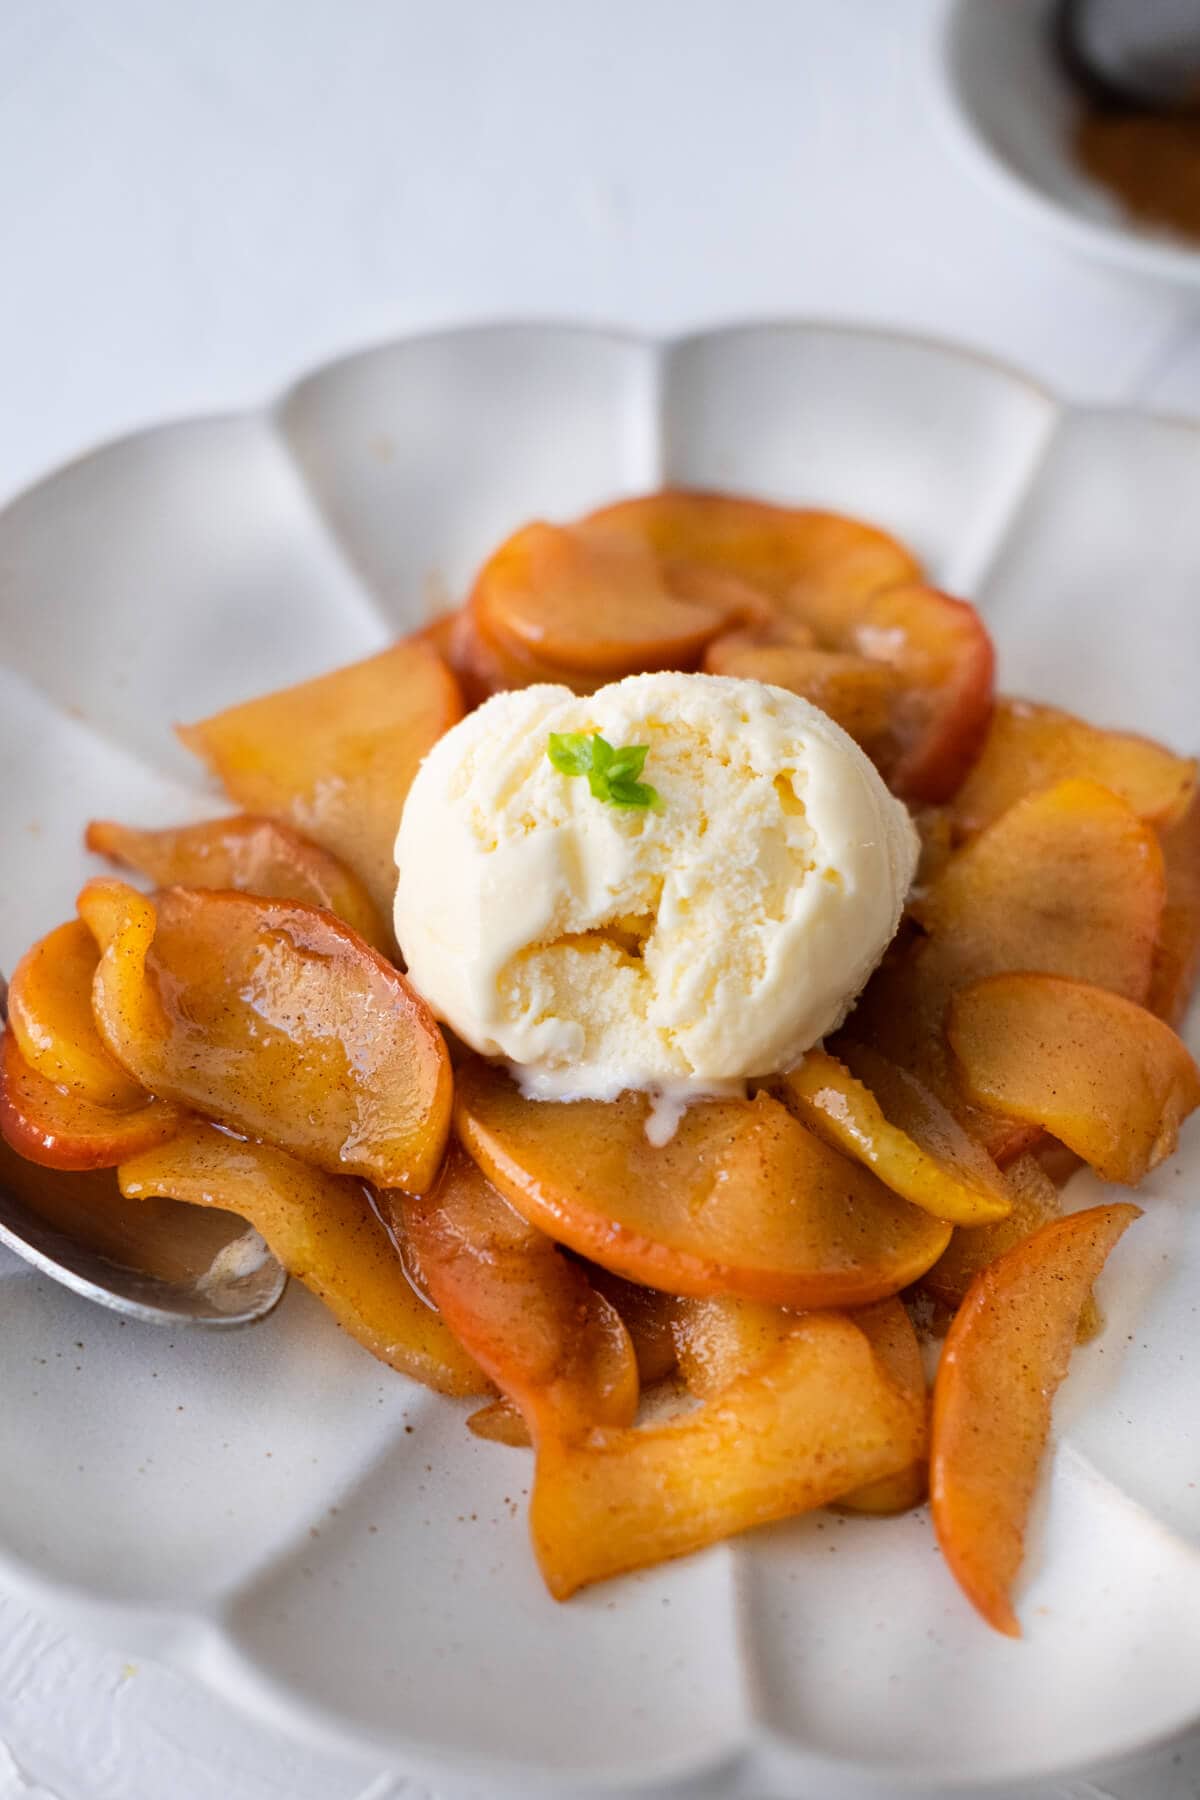 Golden brown fried apples slices with ice cream on top served in a white flower pattern plate.